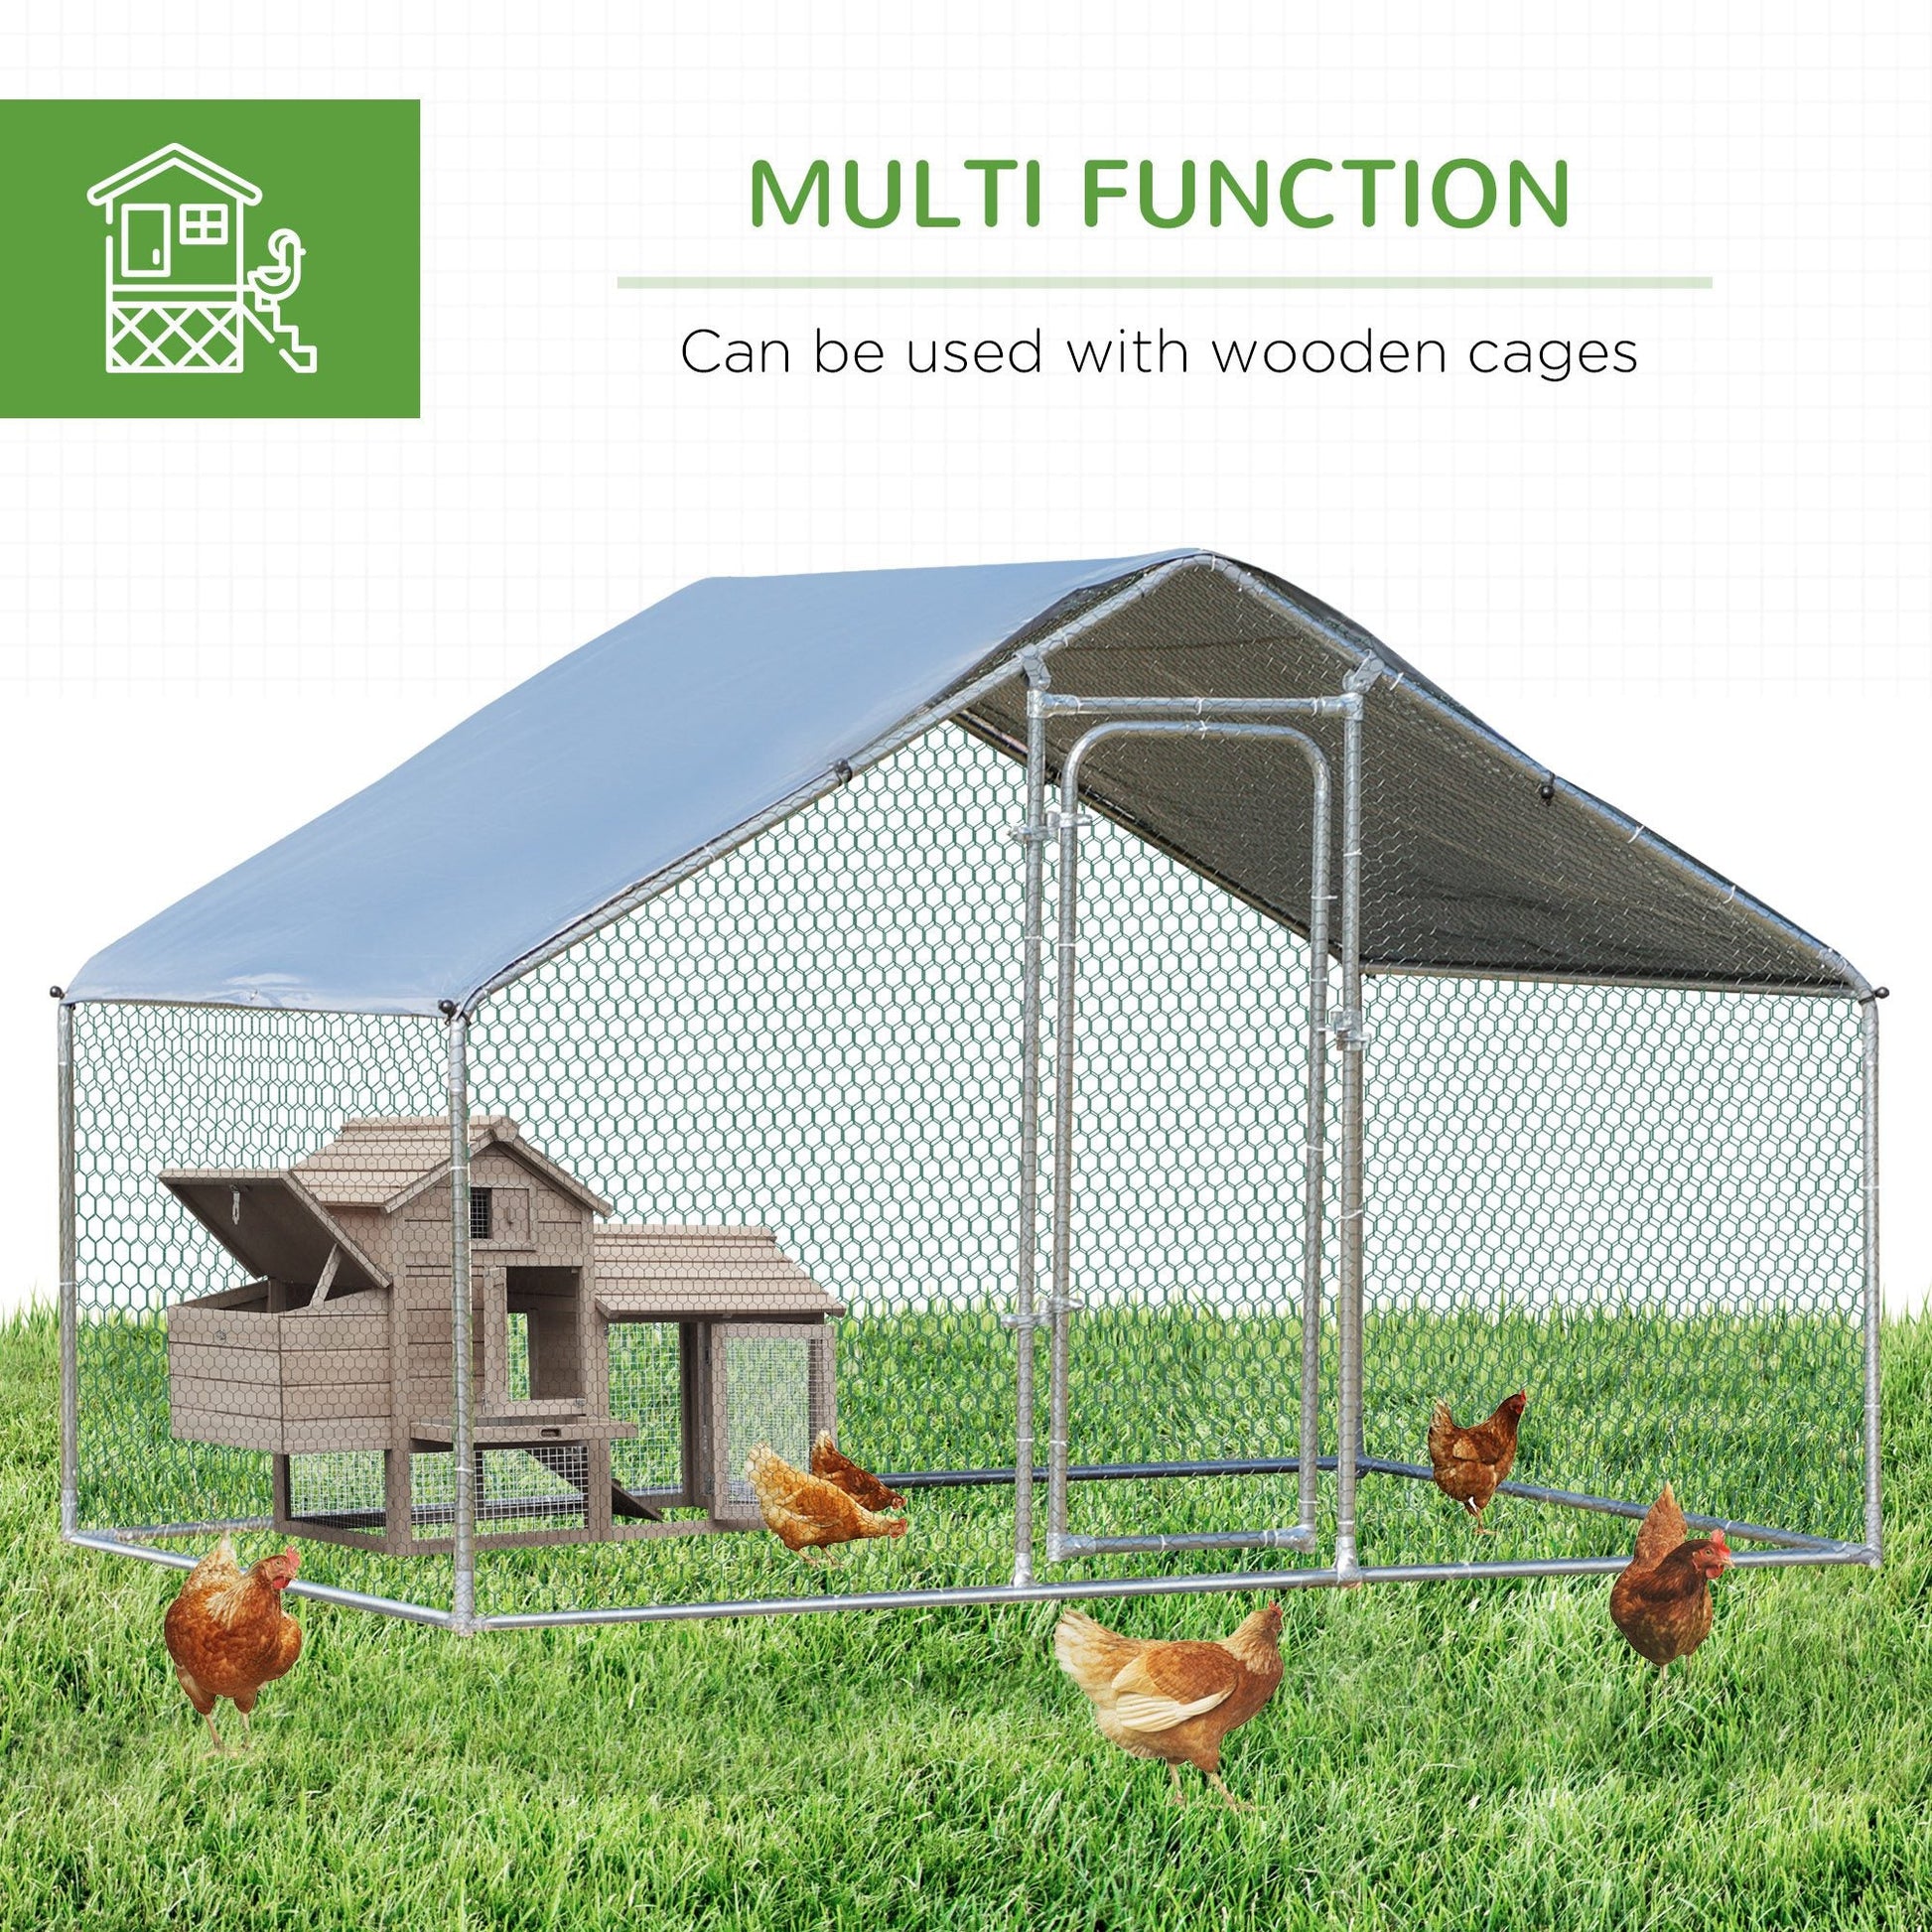 9.8' x 6.6' Metal Chicken Coop, Galvanized Walk-in Hen House, Poultry Cage with 1.25" Tube, Waterproof UV-Protection Cover for Rabbits, Ducks at Gallery Canada